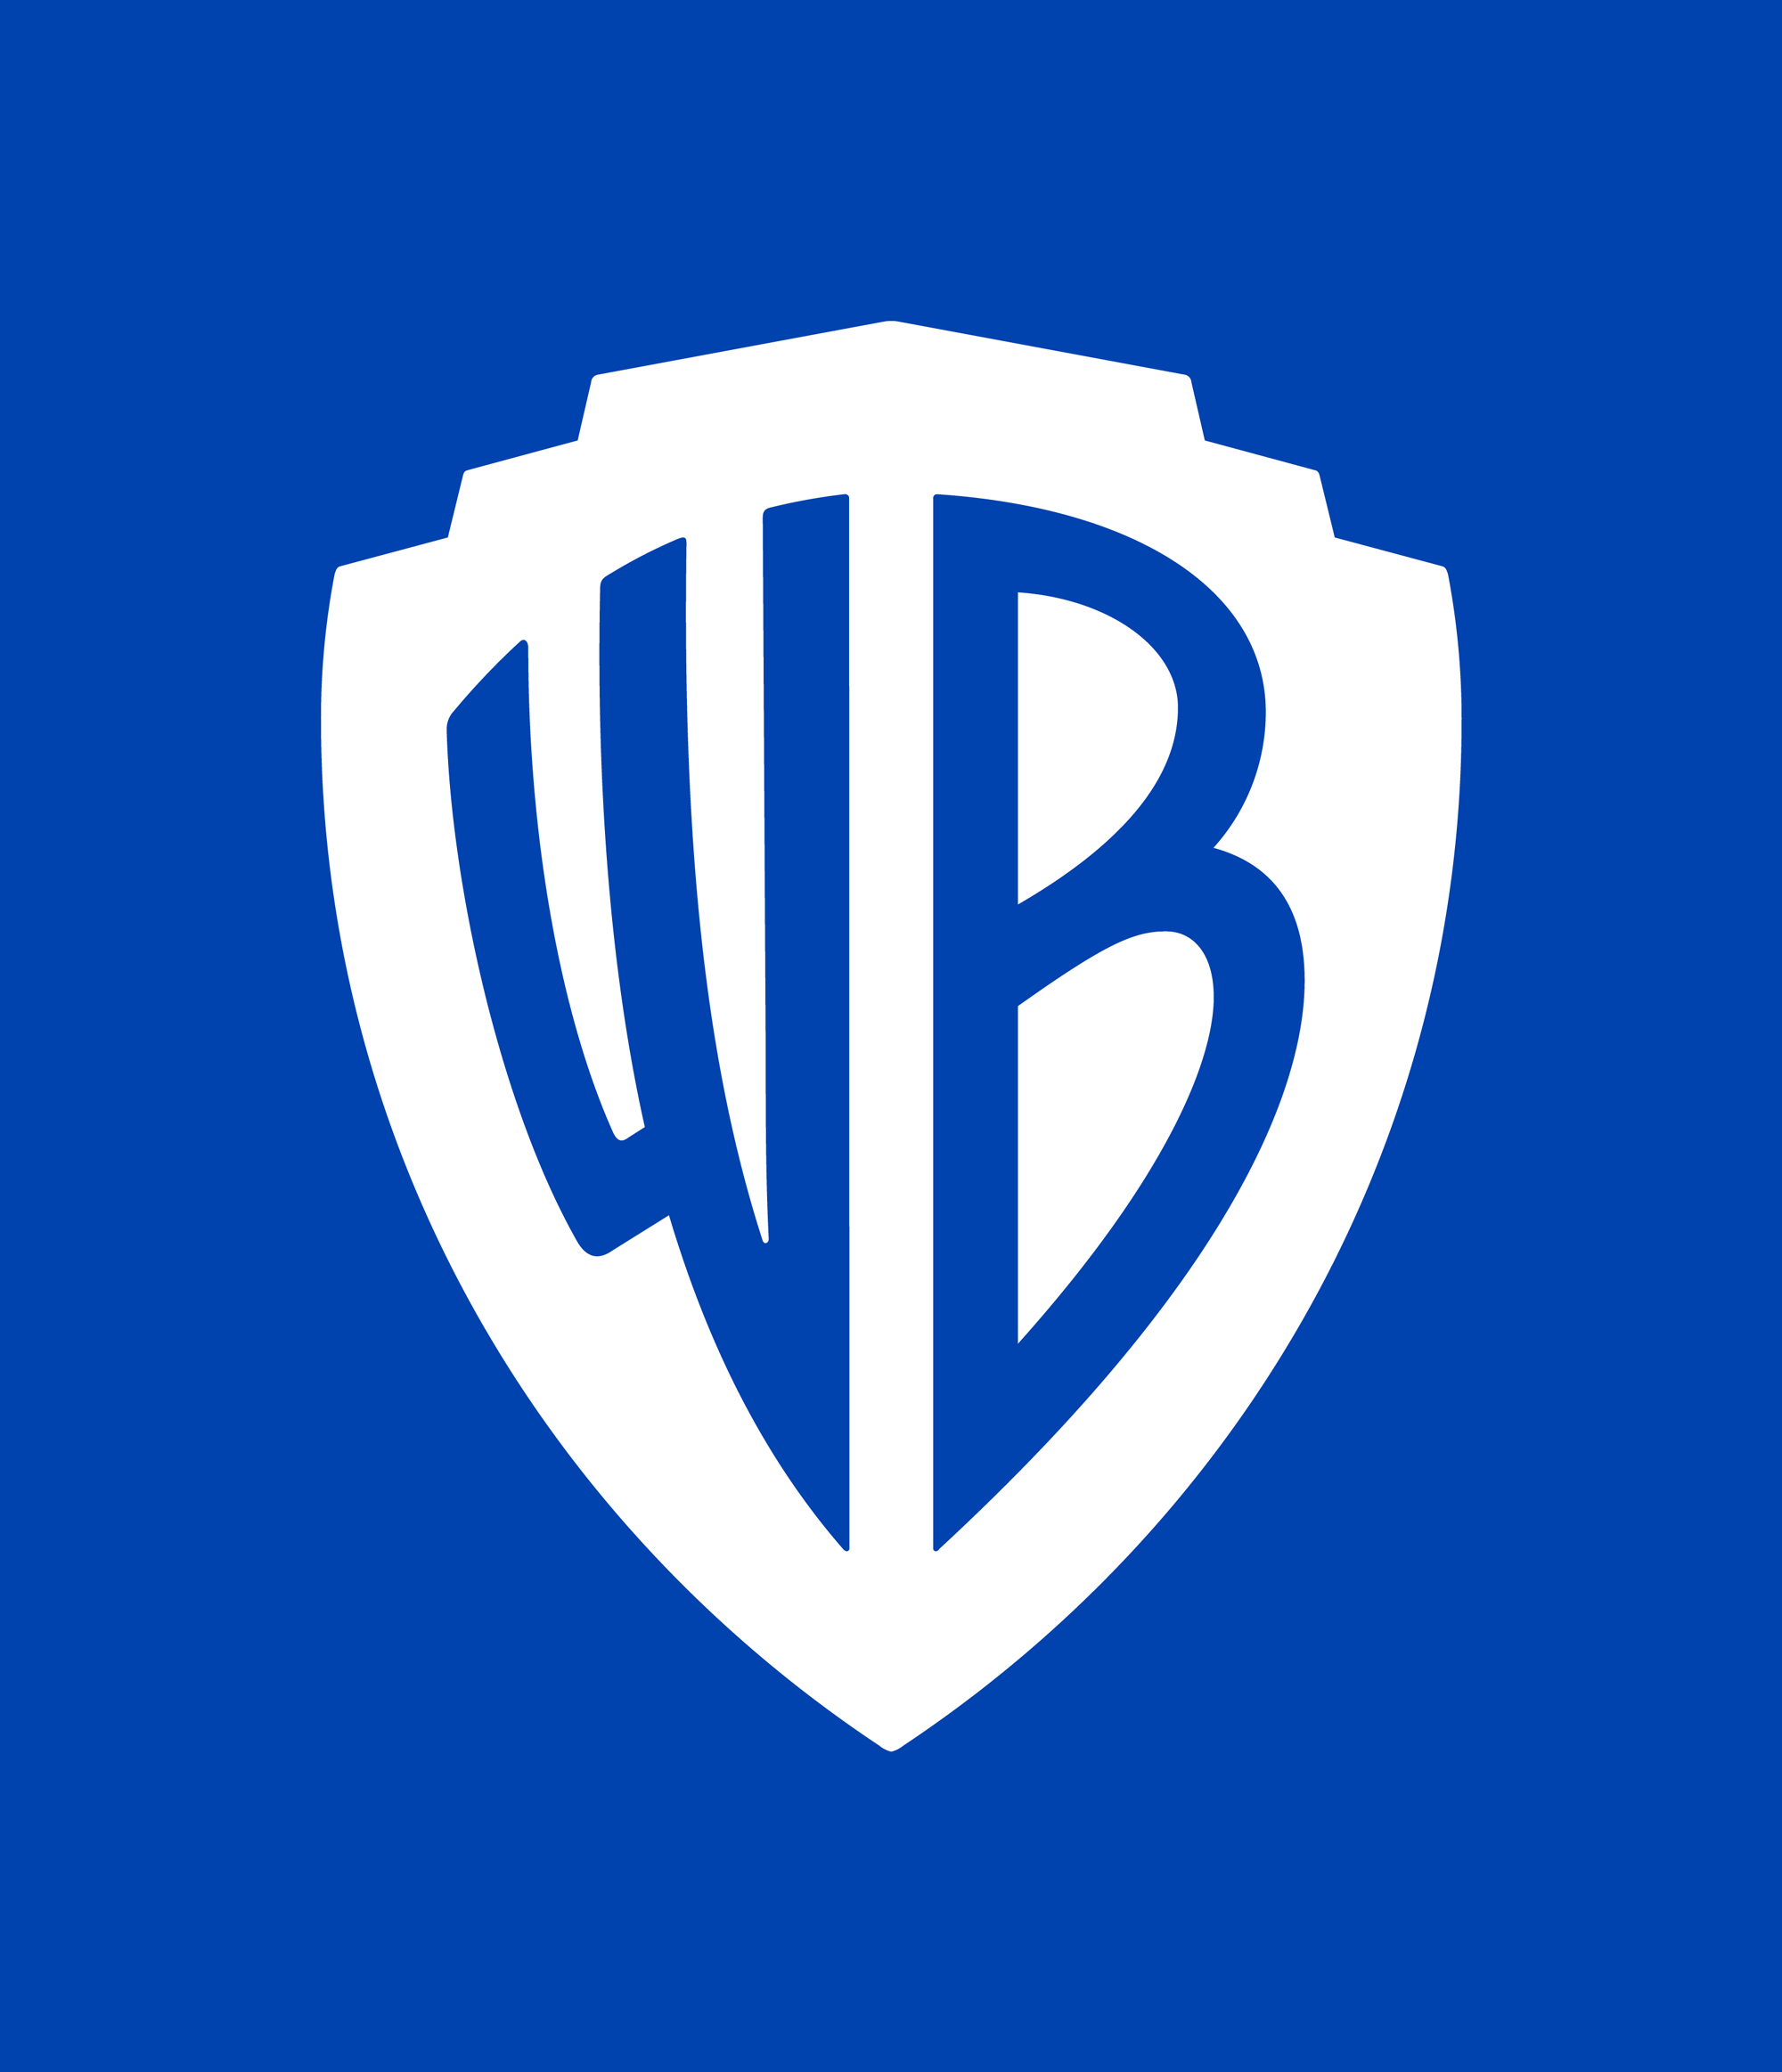 New Logo and Identity for Warner Bros. by Pentagram